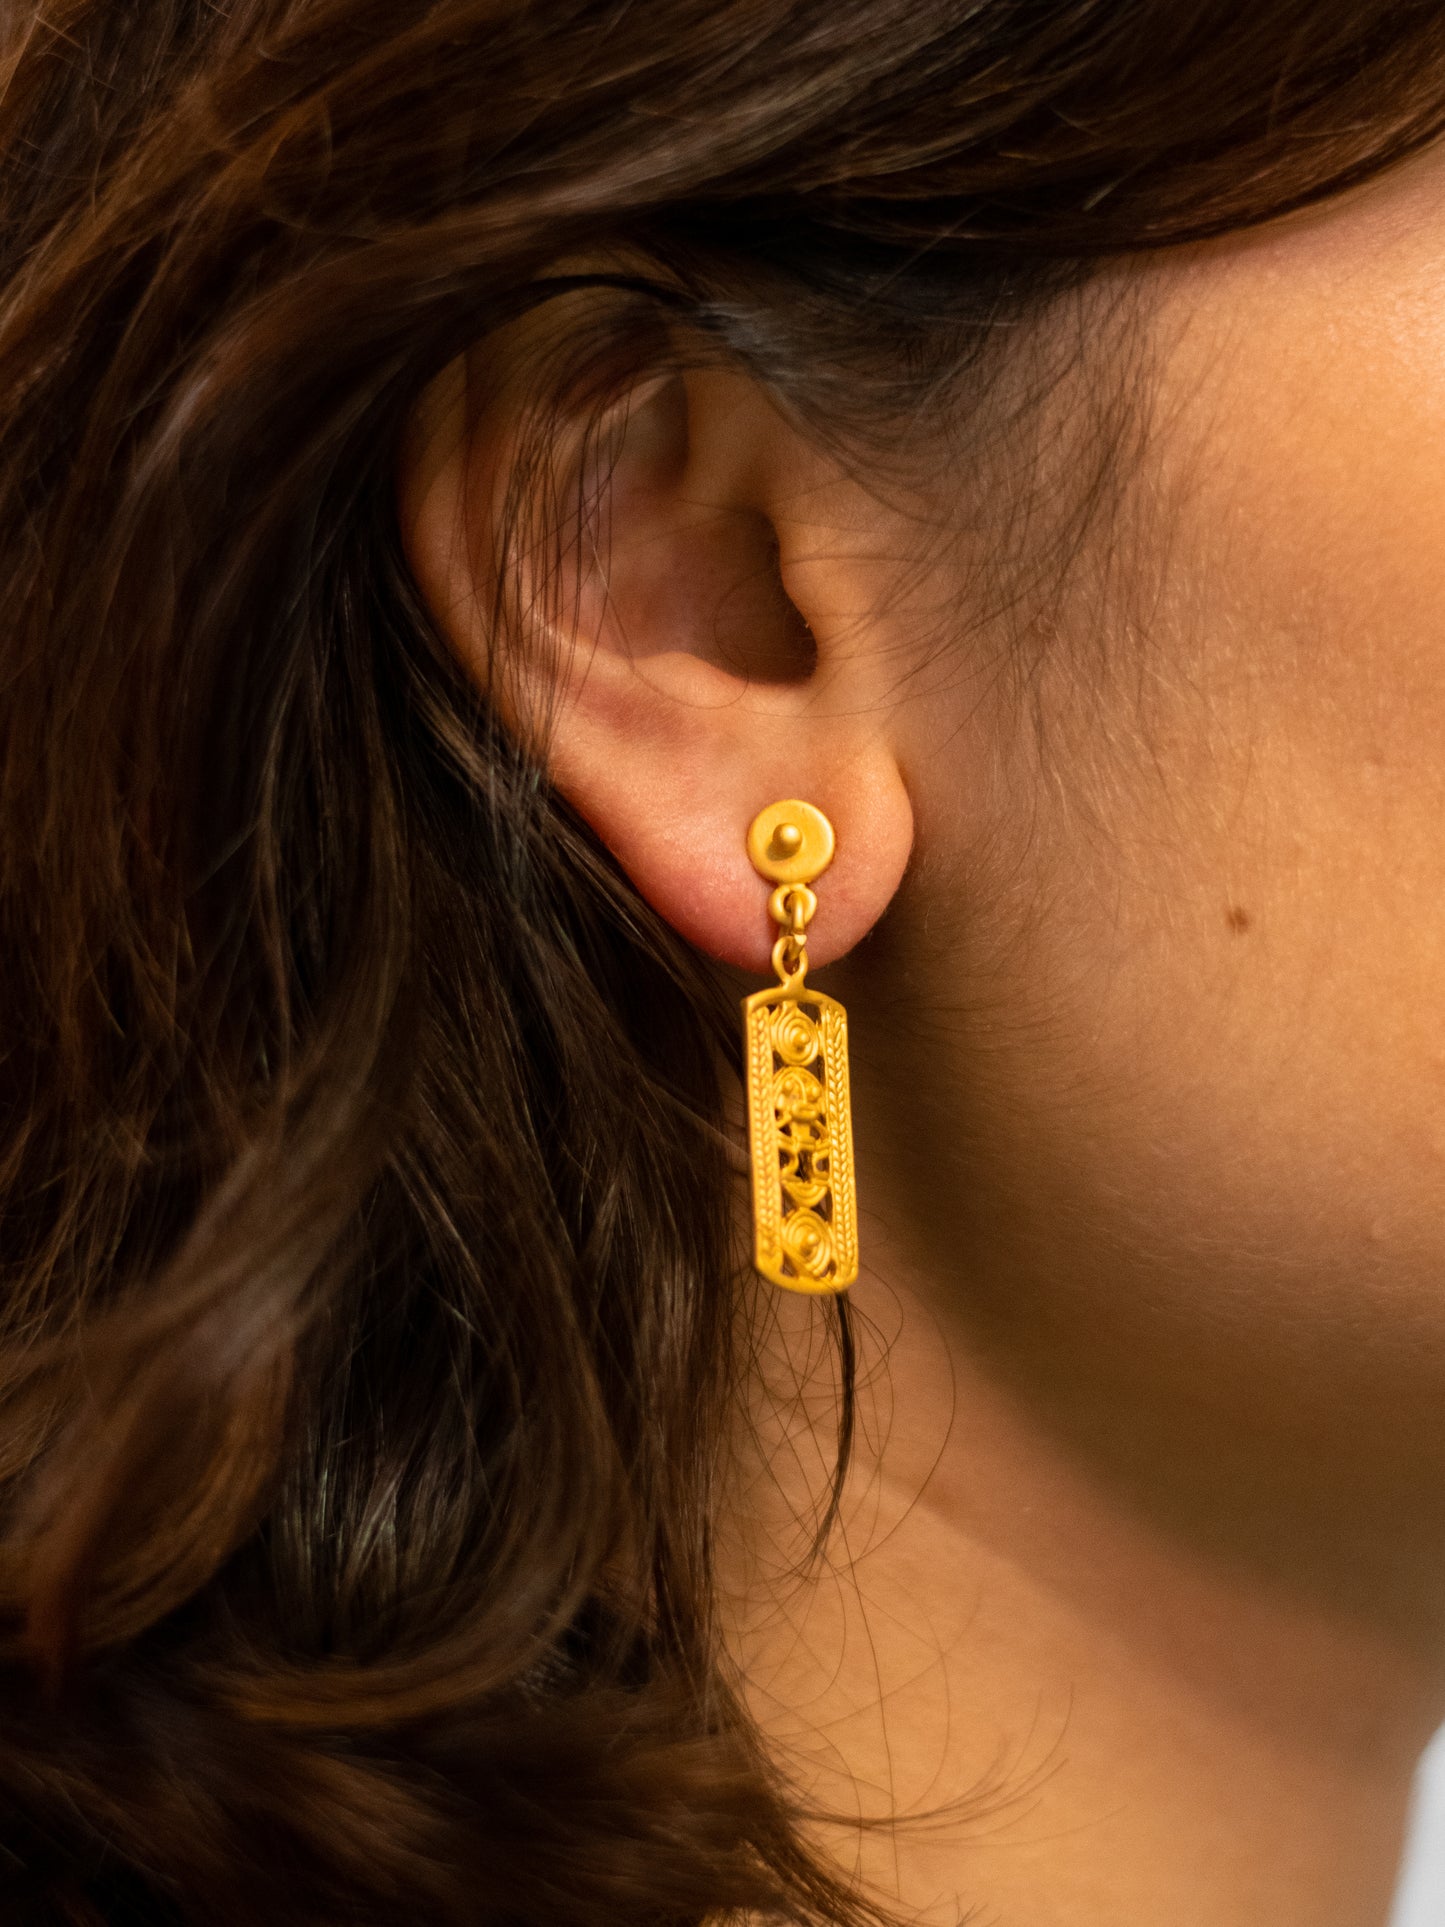 24K Gold Plated Pre-Columbian Muisca Indigenous Symbol Earrings.